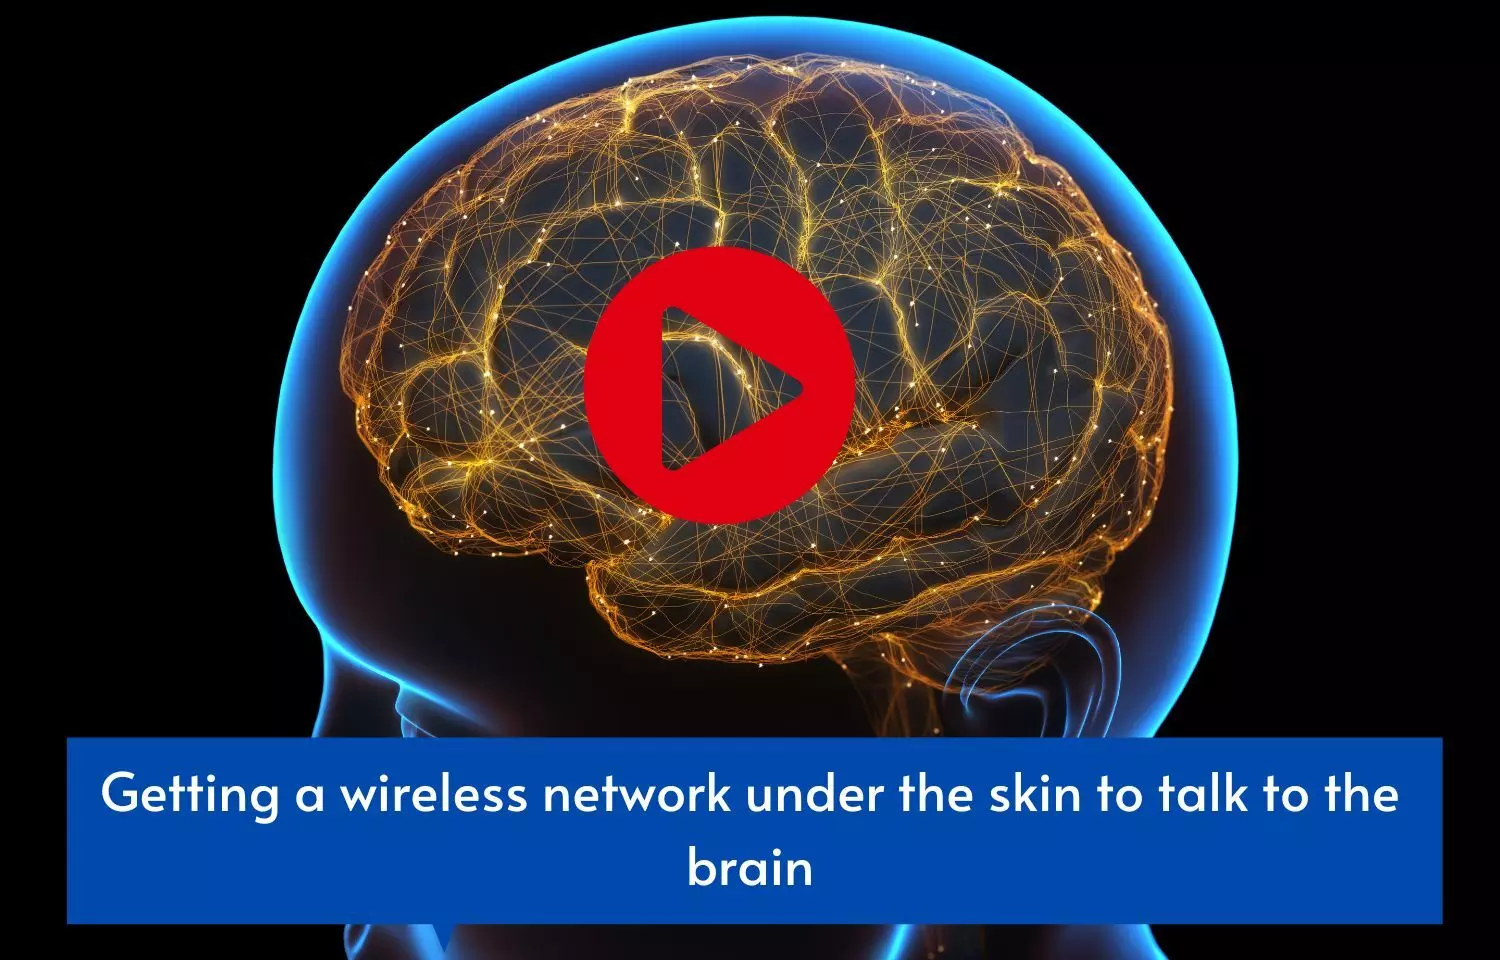 Getting a wireless network under the skin to talk to the brain